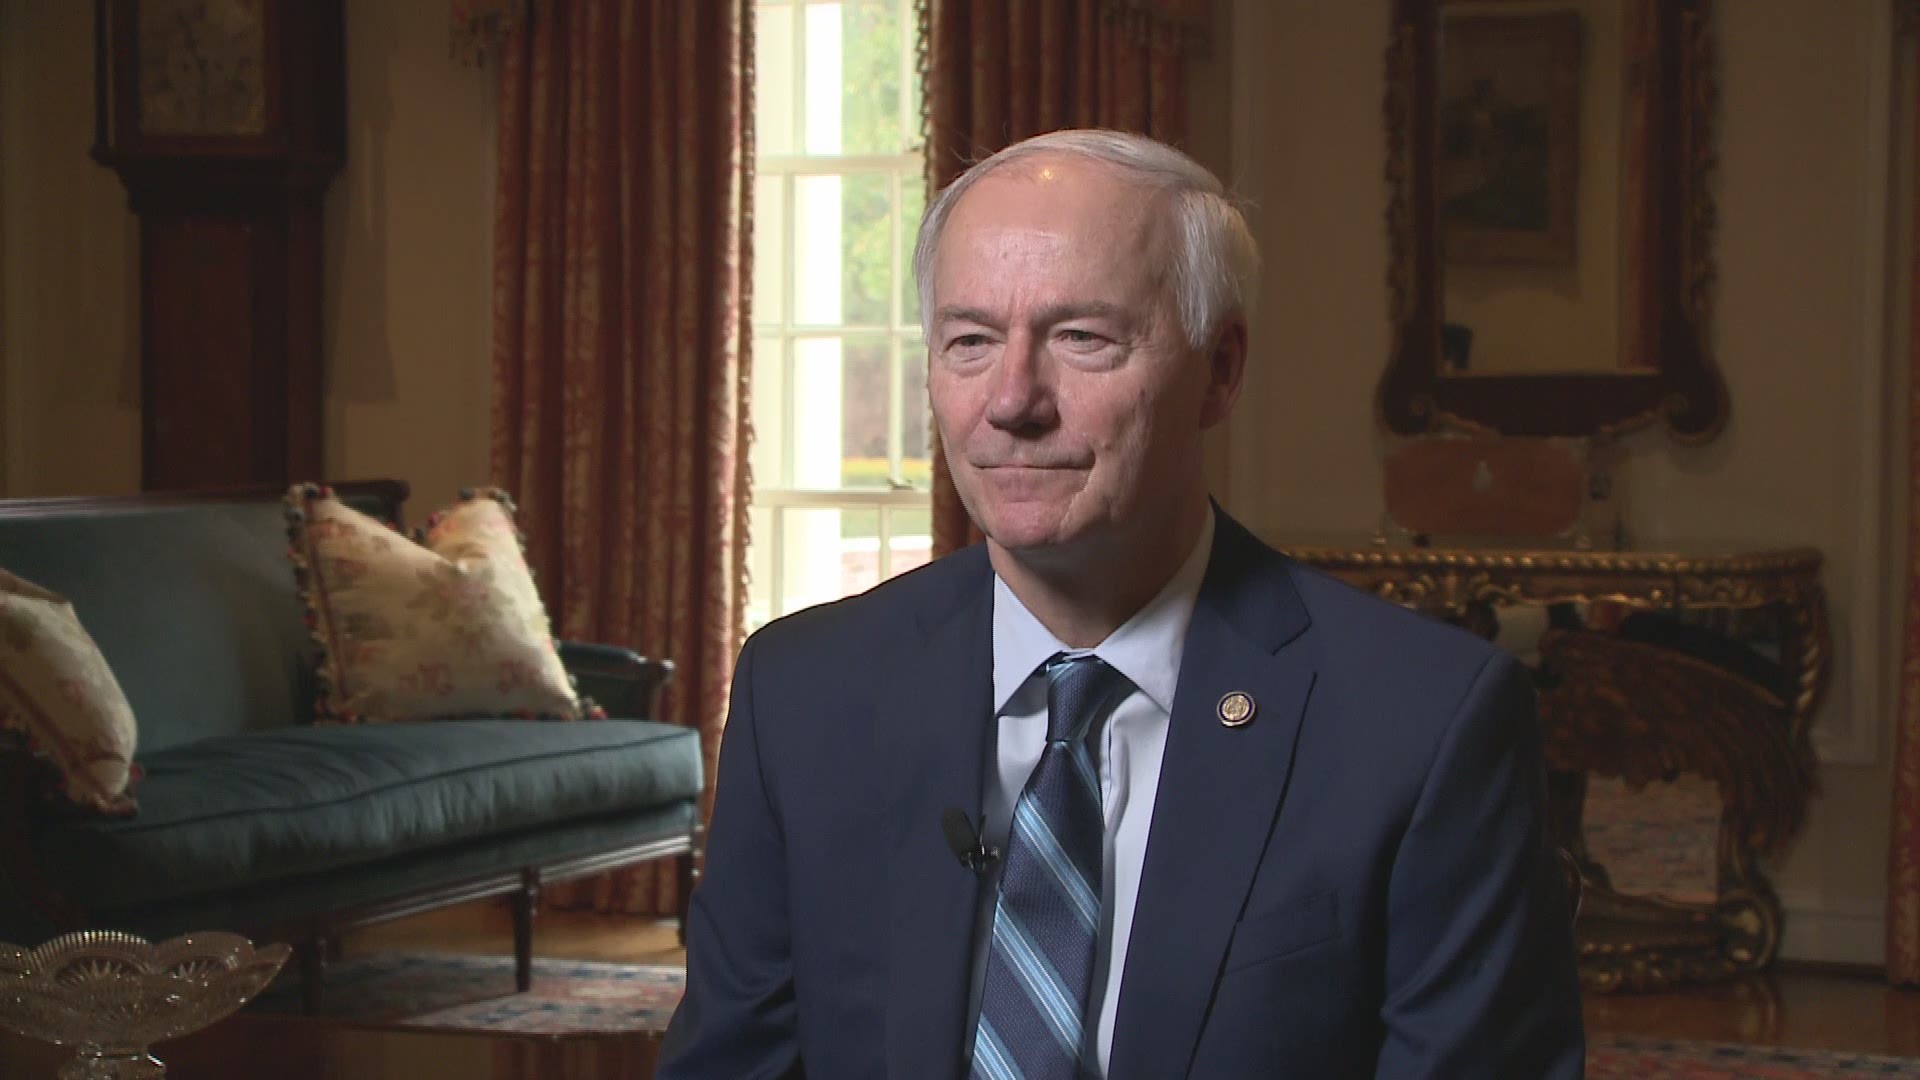 Gov. Hutchinson sat down with us to discuss his goals for the 92nd General Assembly.